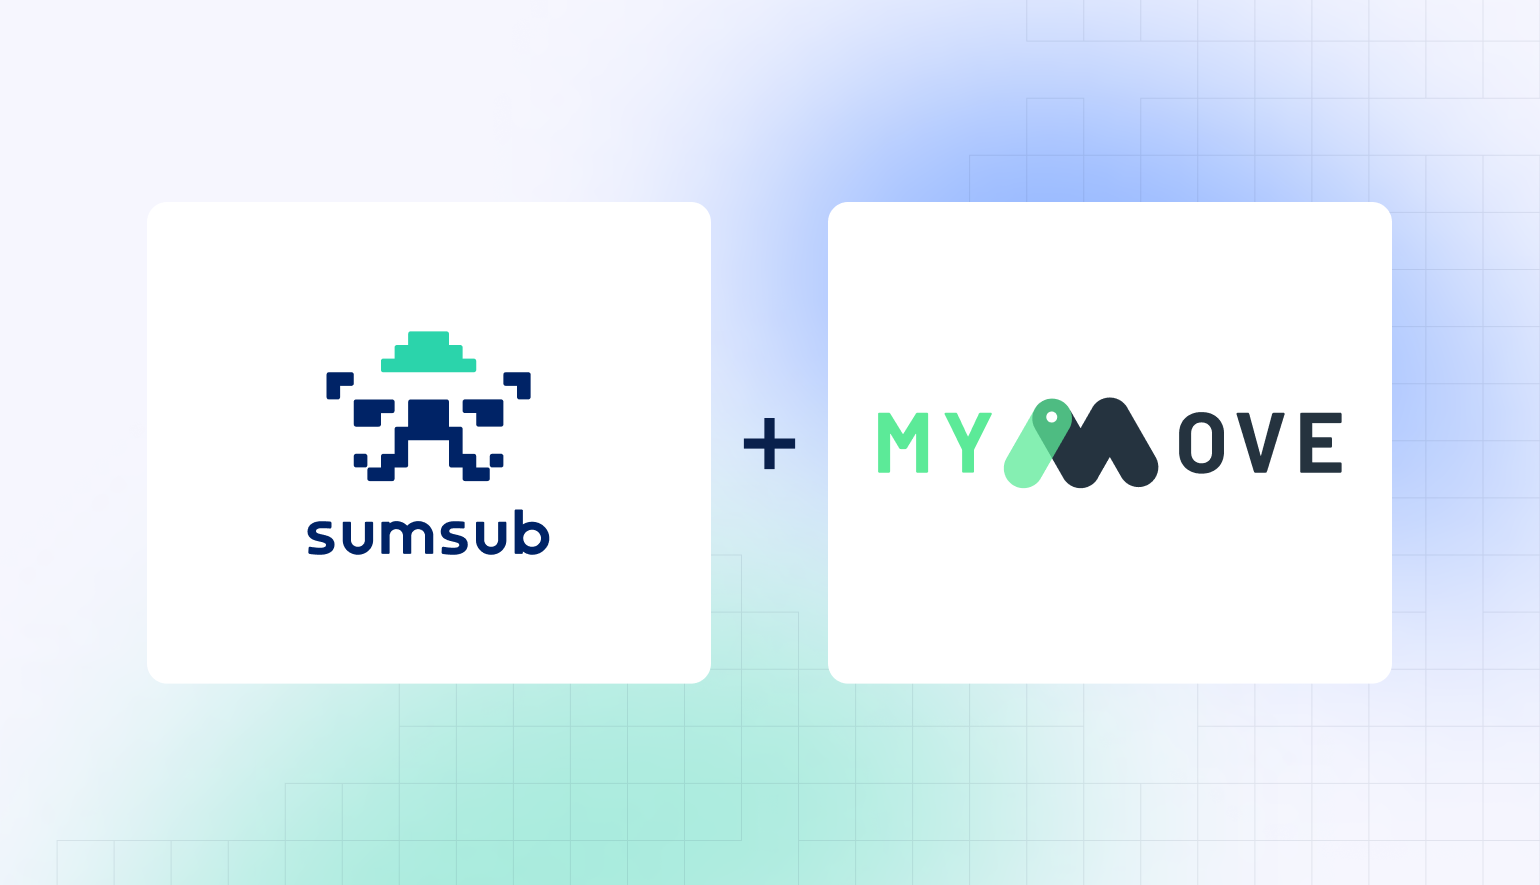 88% KYC pass rate: Sumsub and MyMove Share their Partnership Report